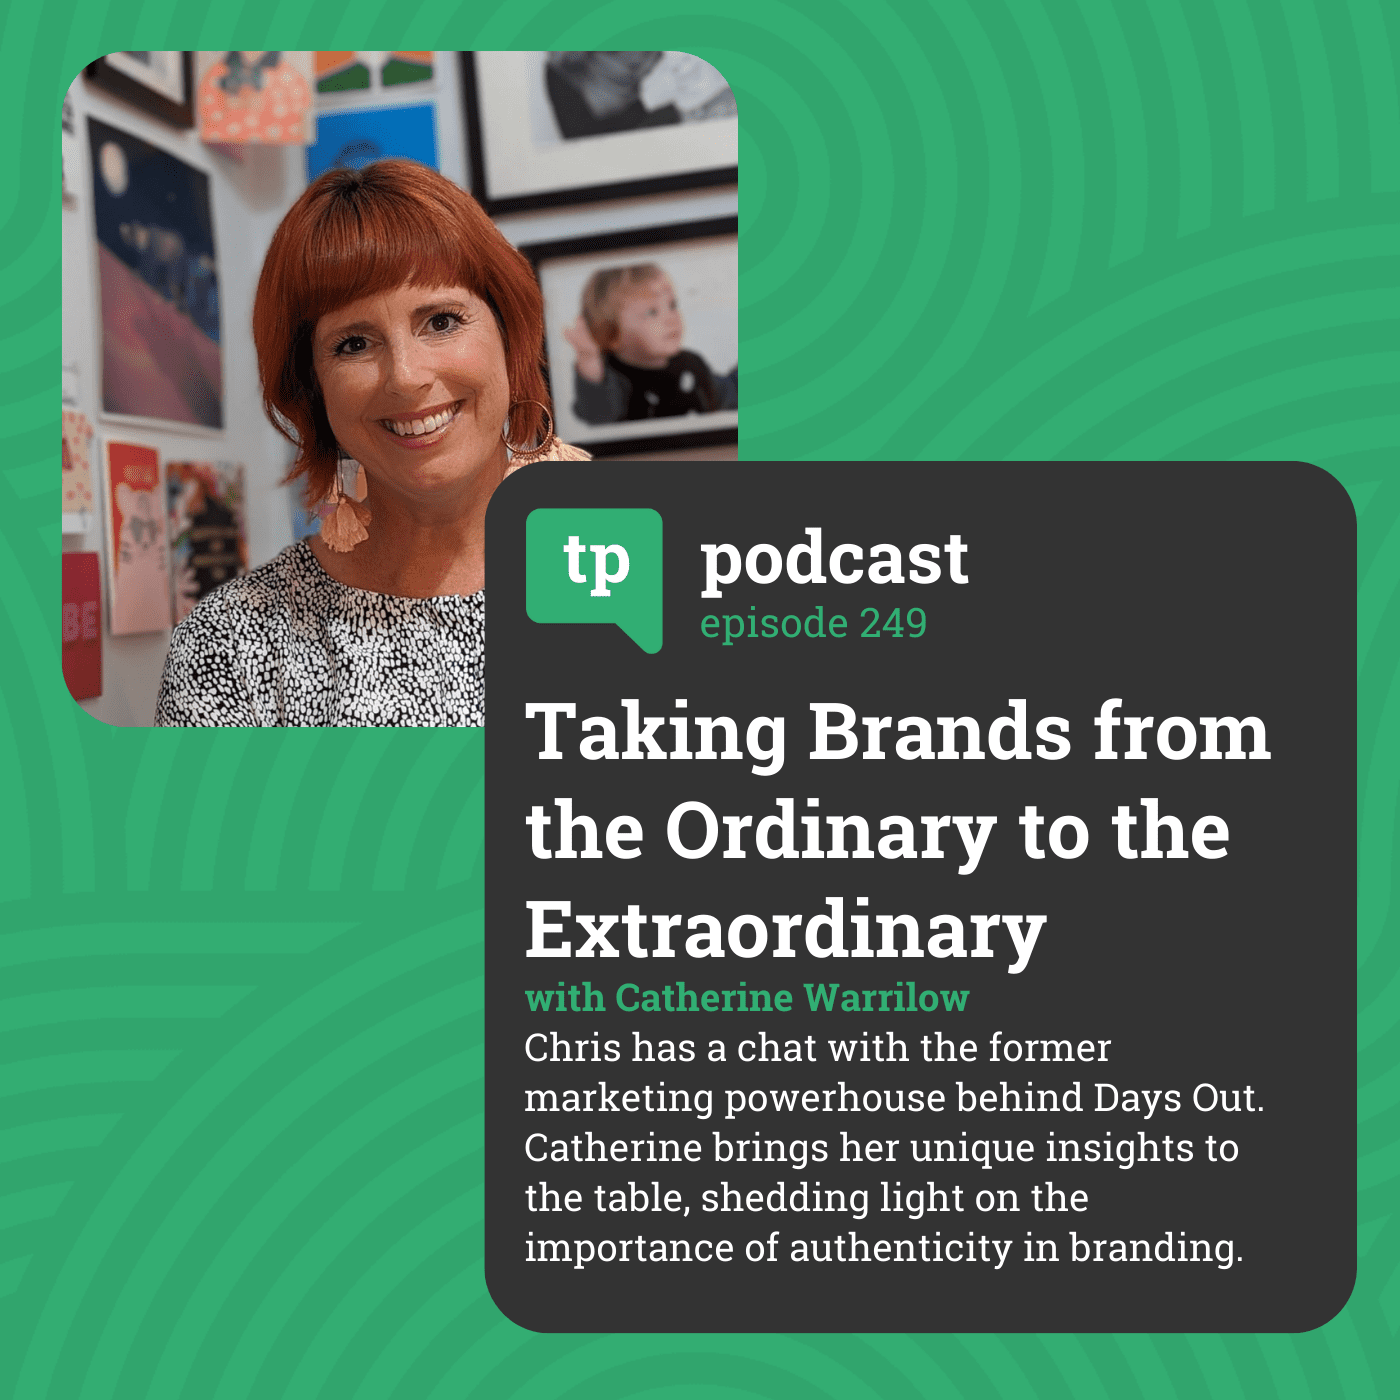 Taking Brands from the Ordinary to the Extraordinary, with Catherine Warrilow